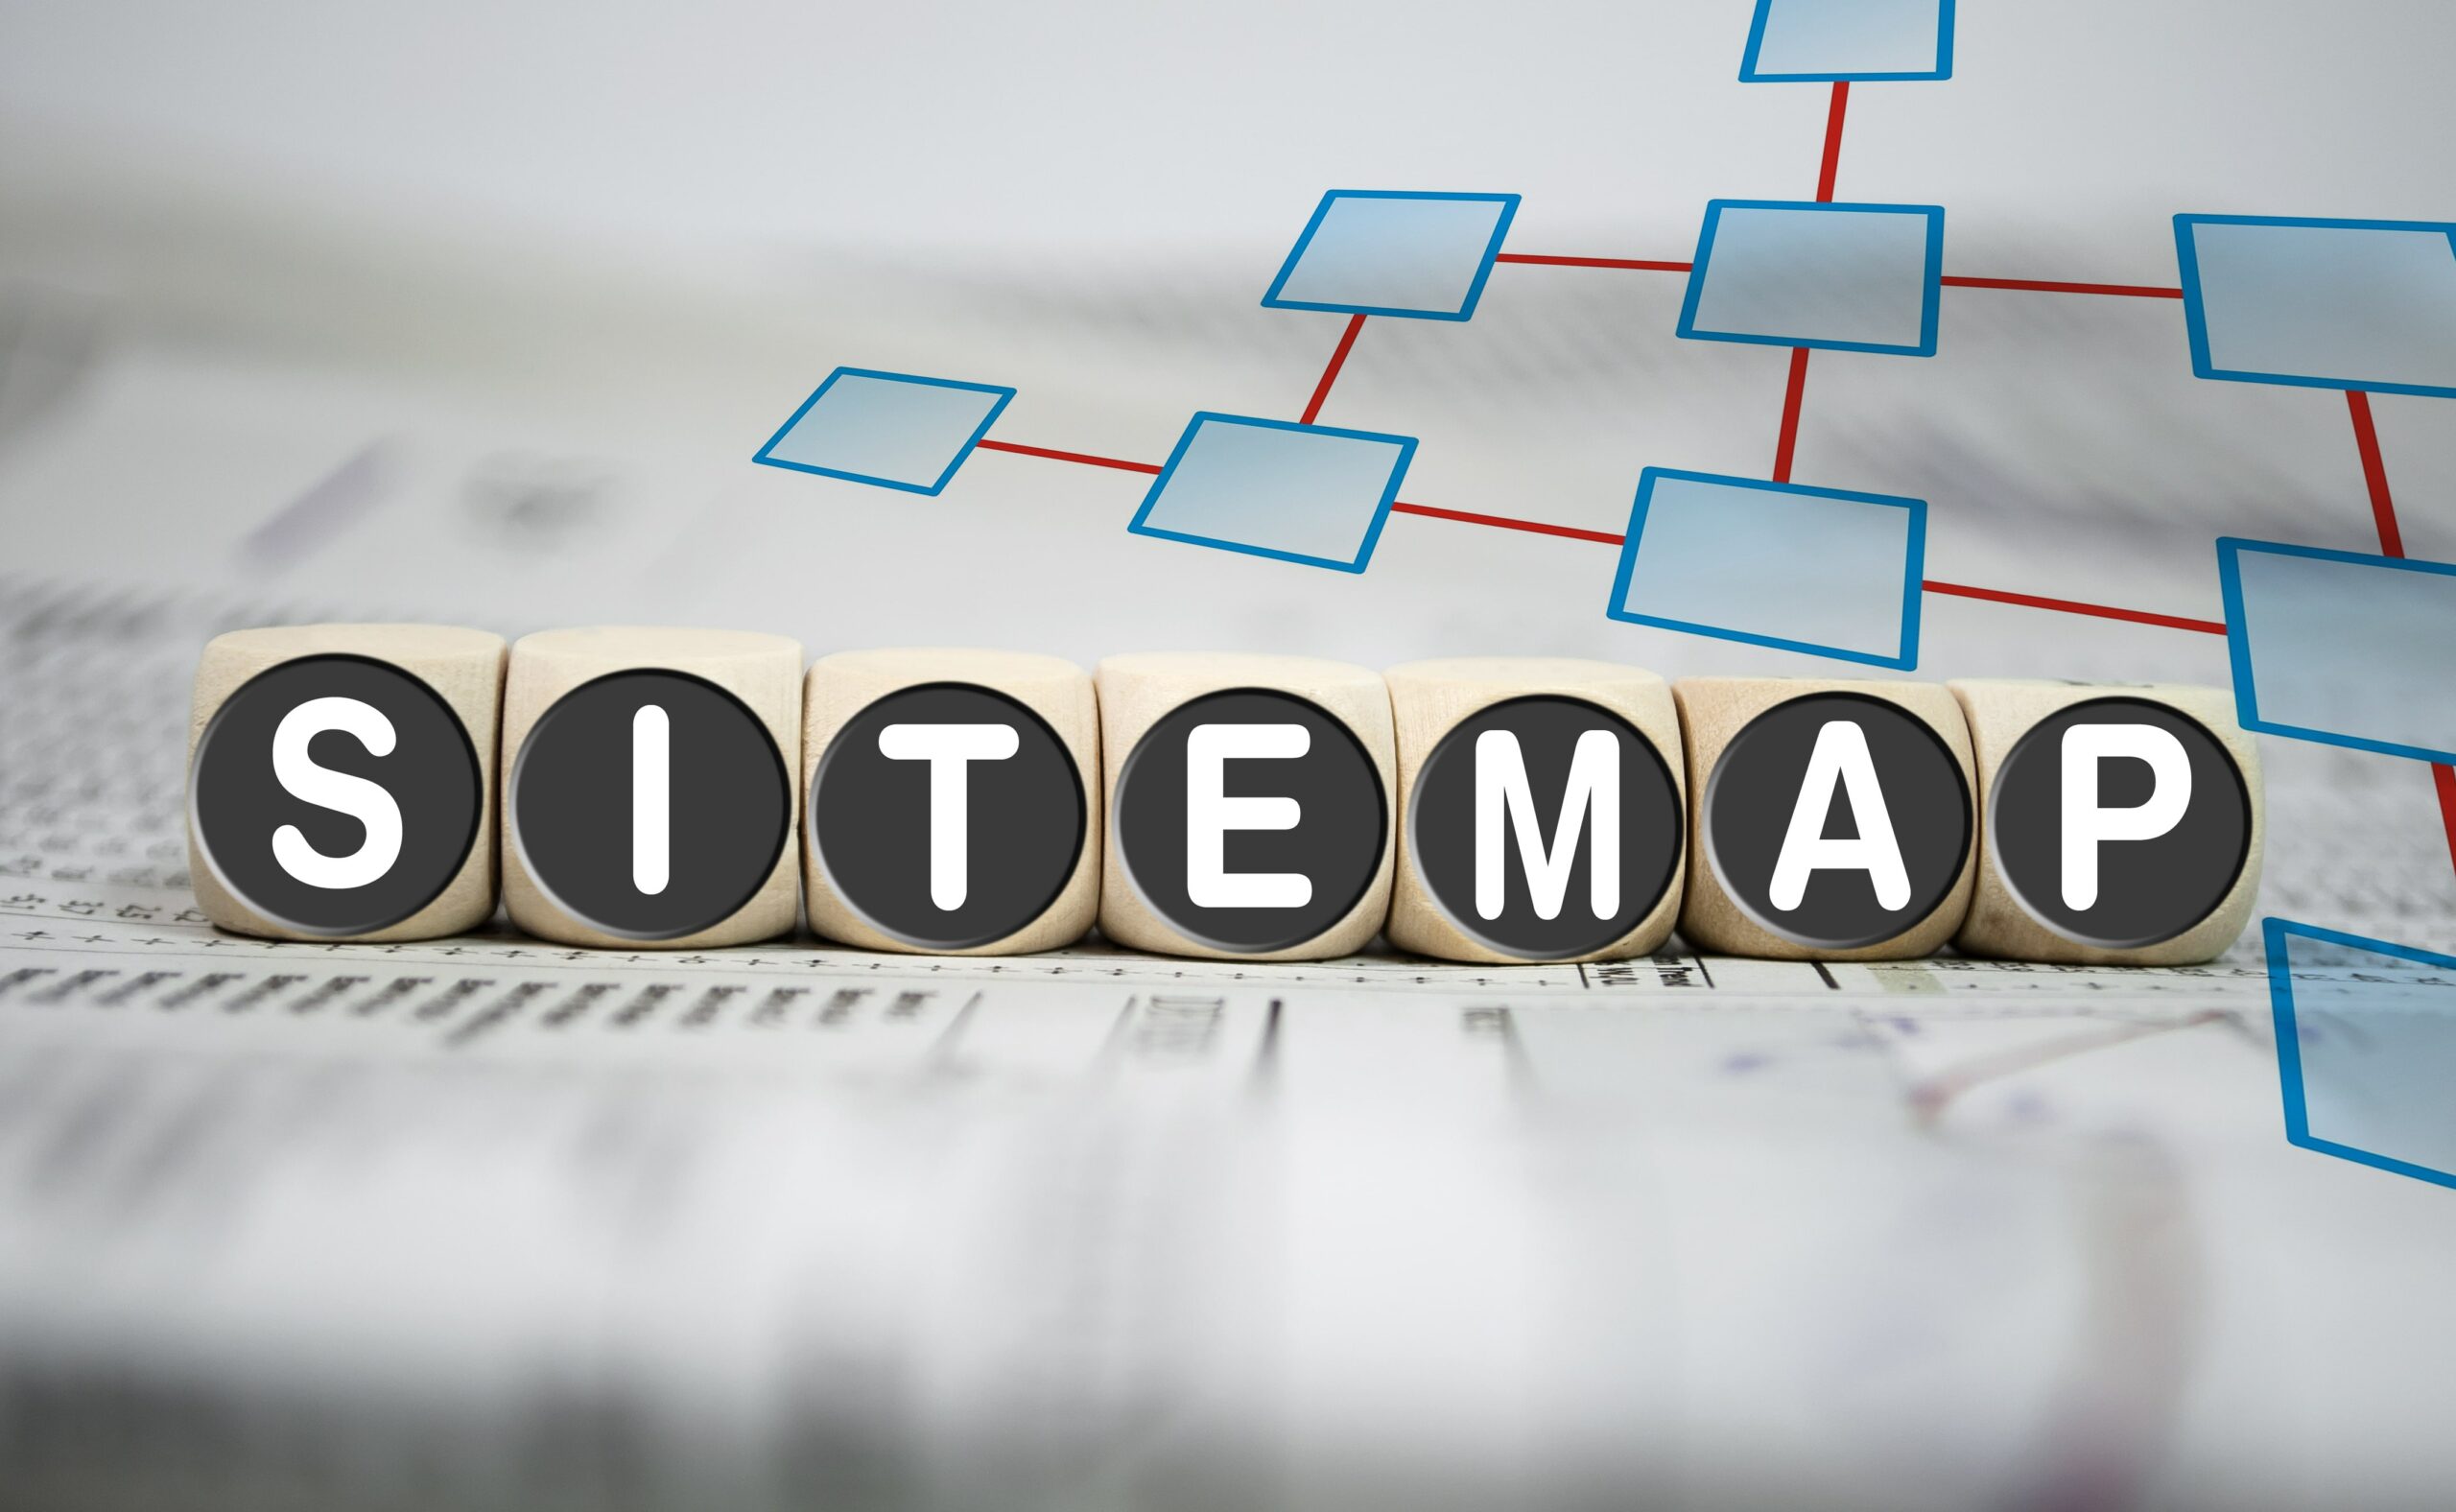 5 Biggest Sitemap Mistakes And How To Fix Them